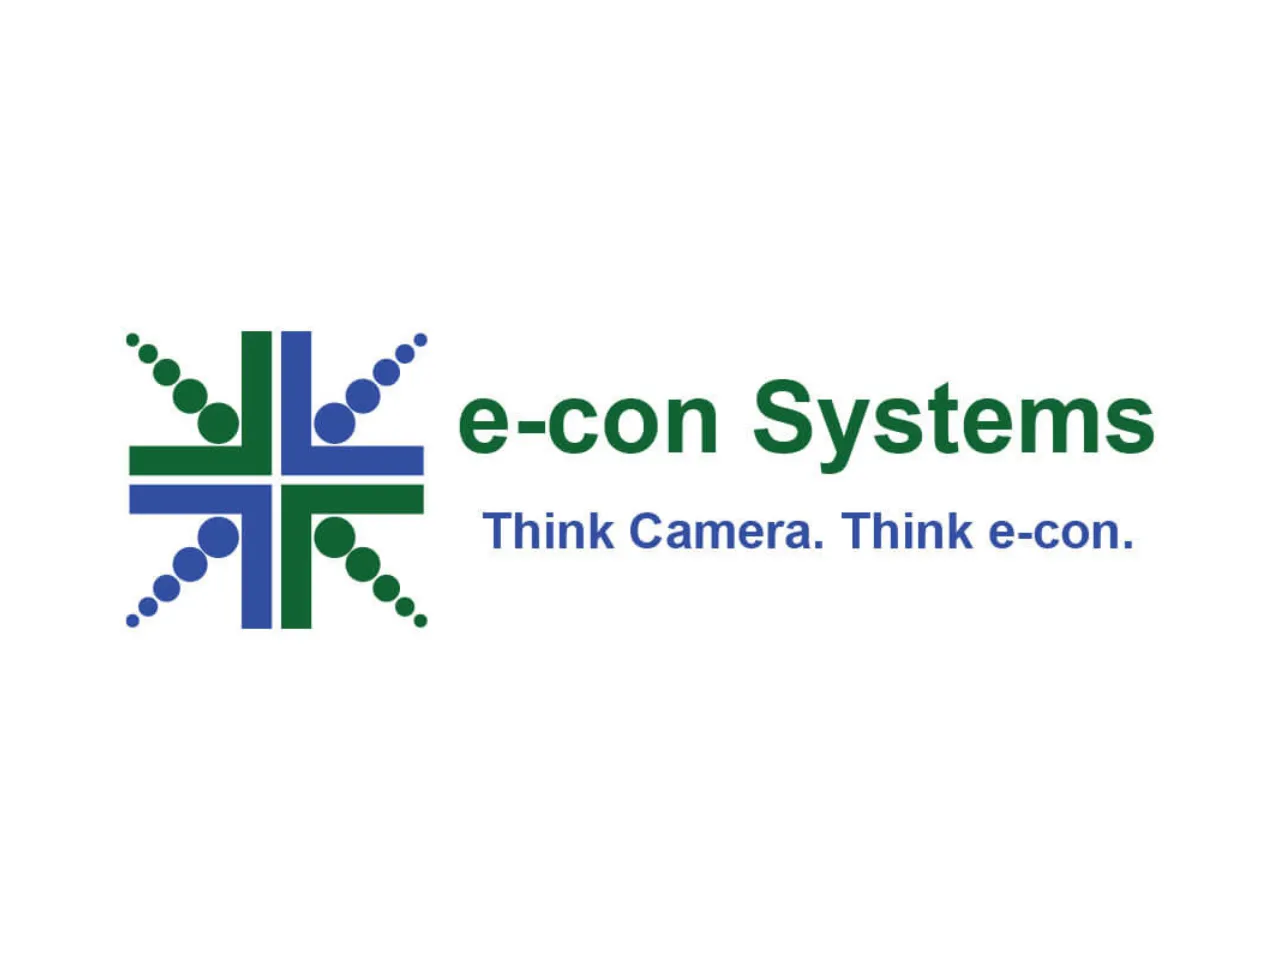 E-con Systems, an embedded vision products and solutions company, raises Rs 100 crore